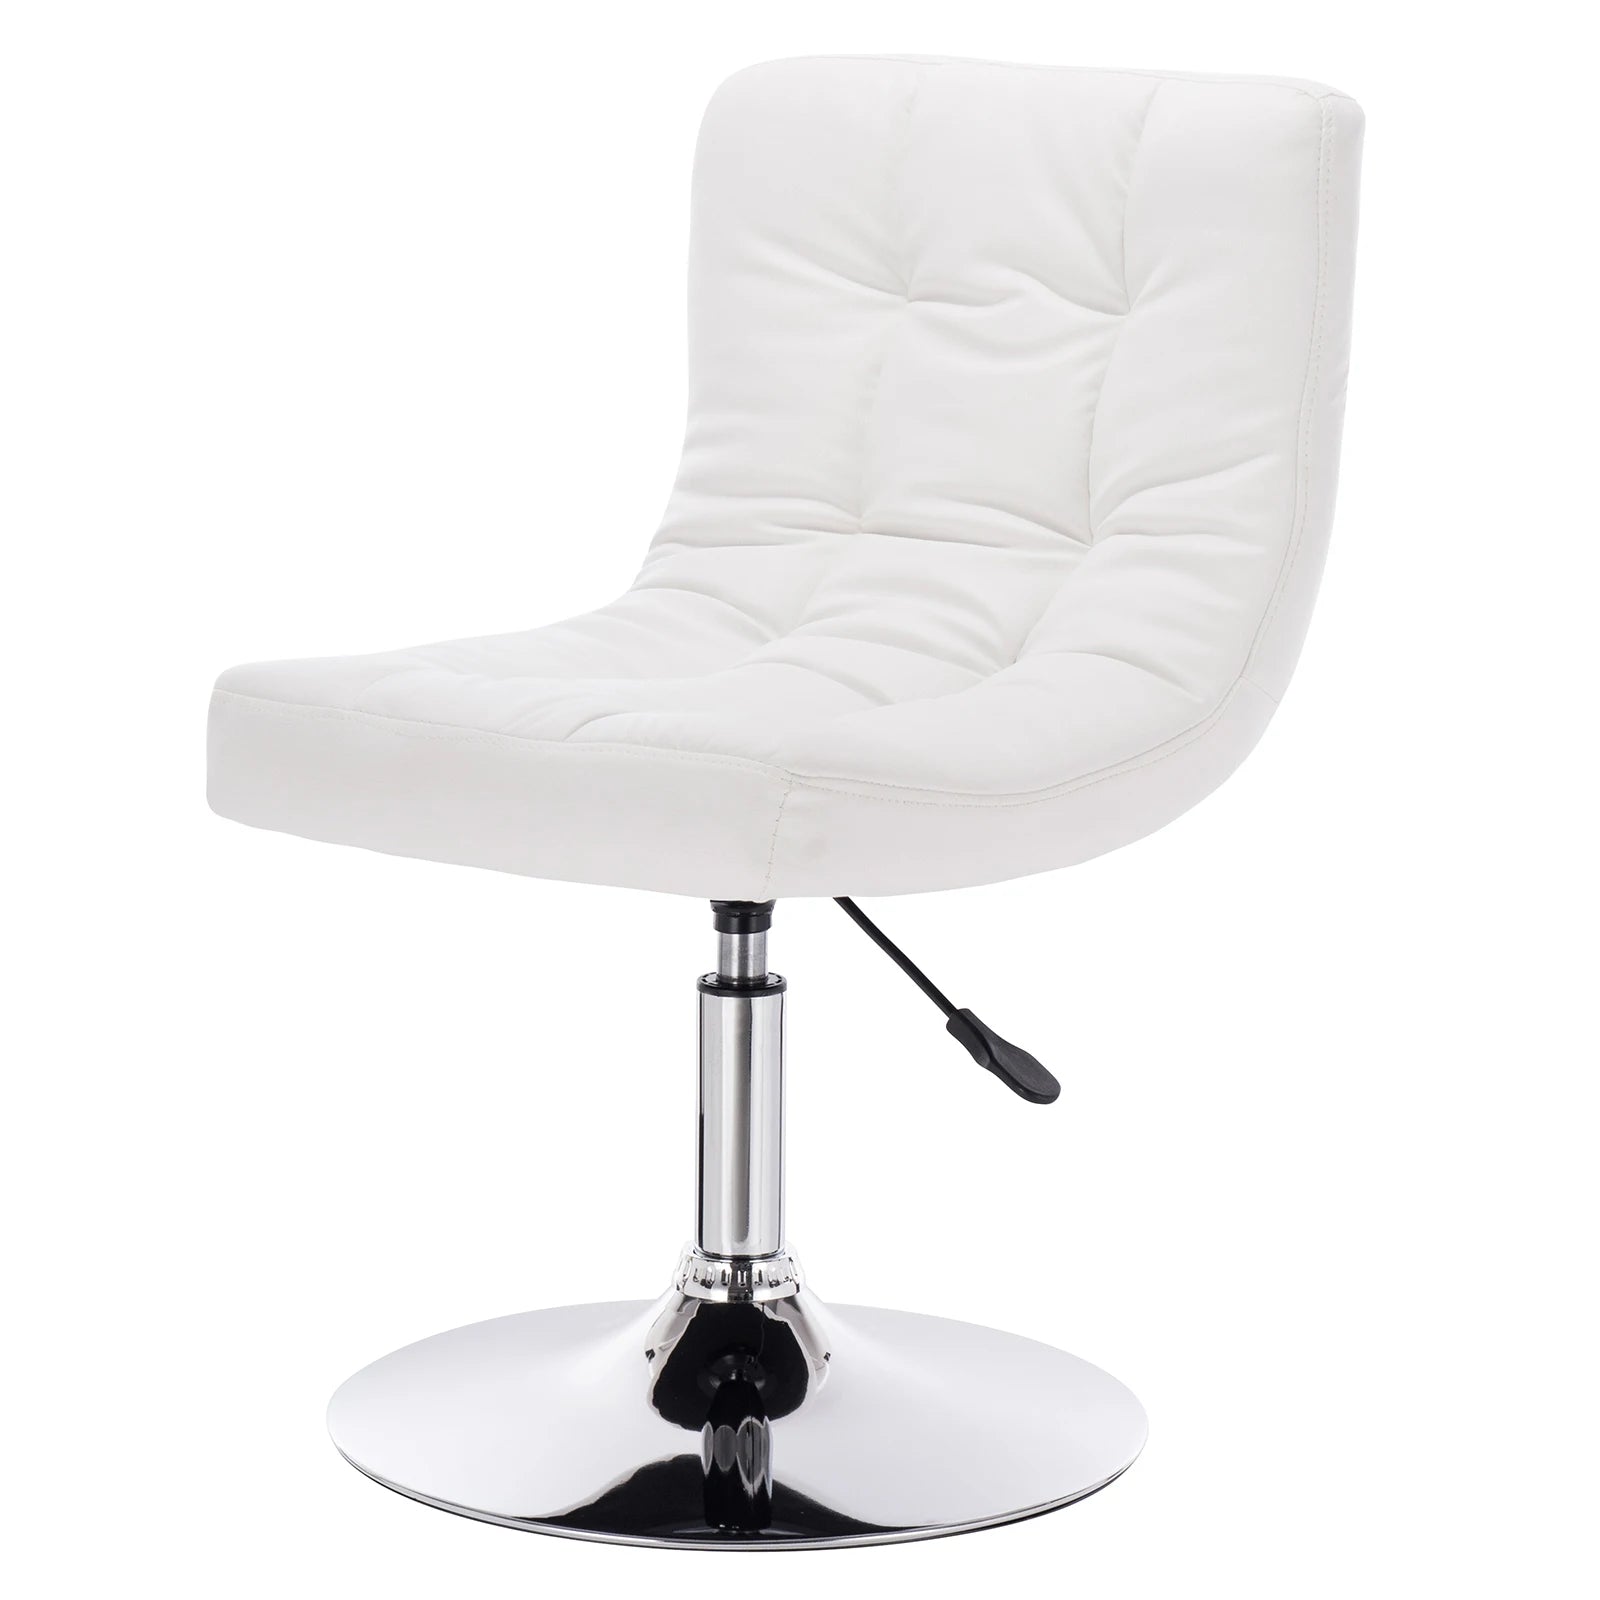 White Bar Chair Stepless Height Adjustment Chrome-Plated Steel Seat